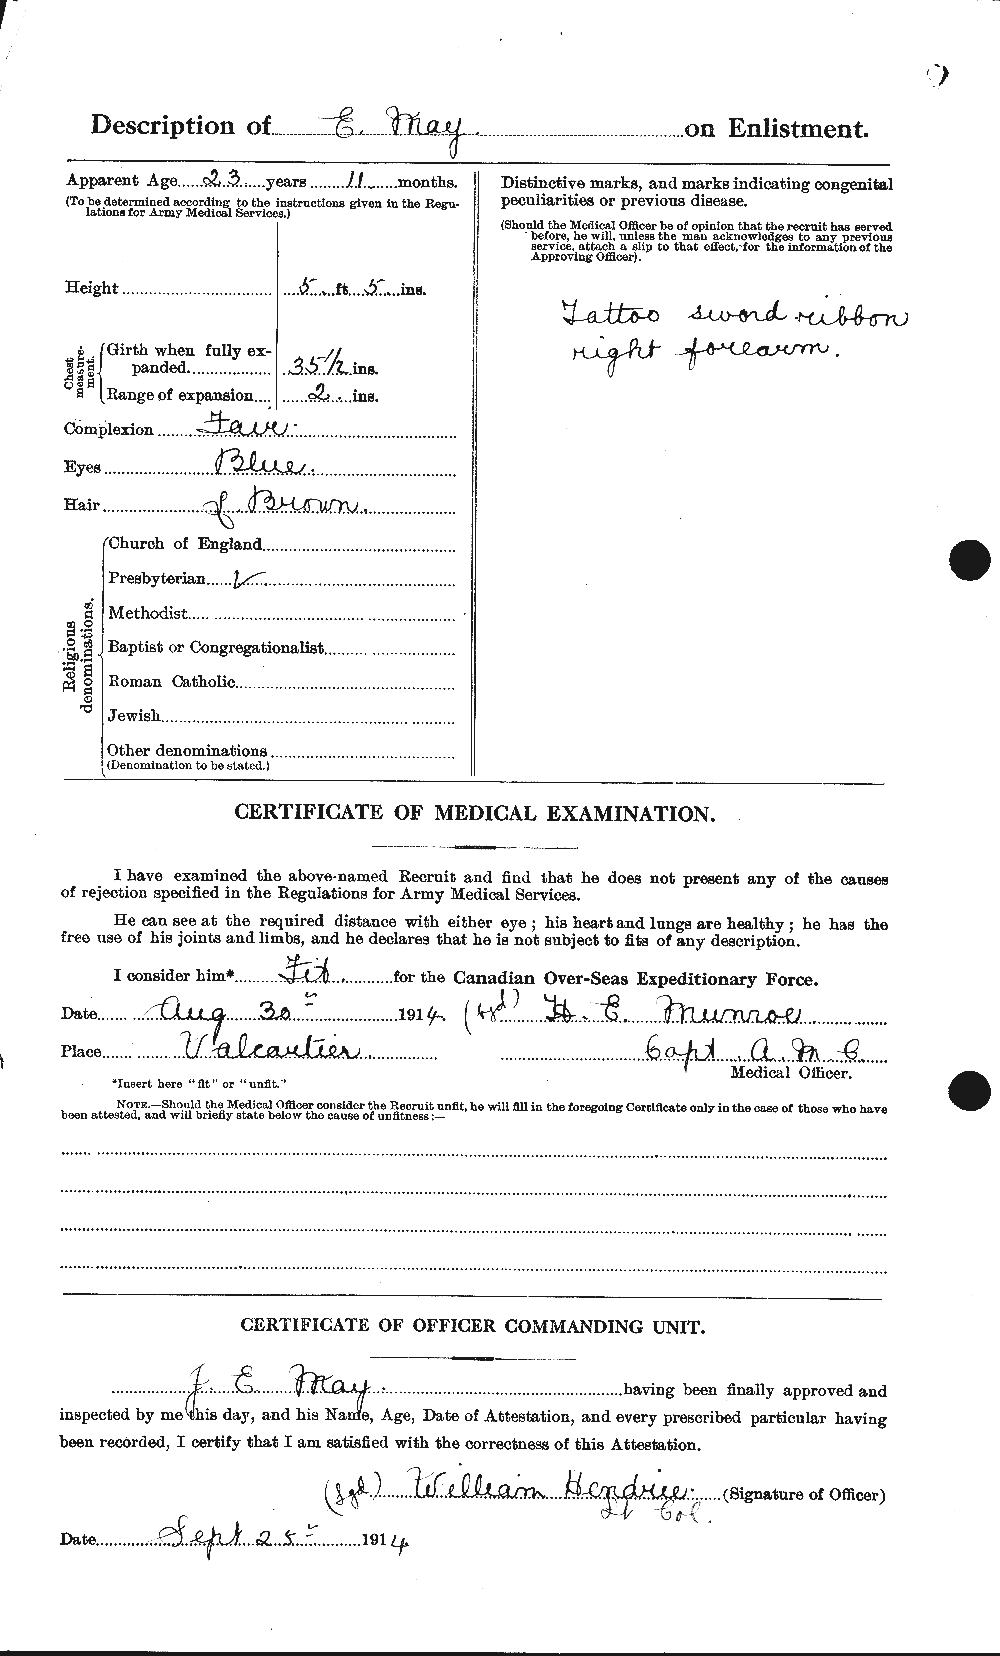 Personnel Records of the First World War - CEF 492211b